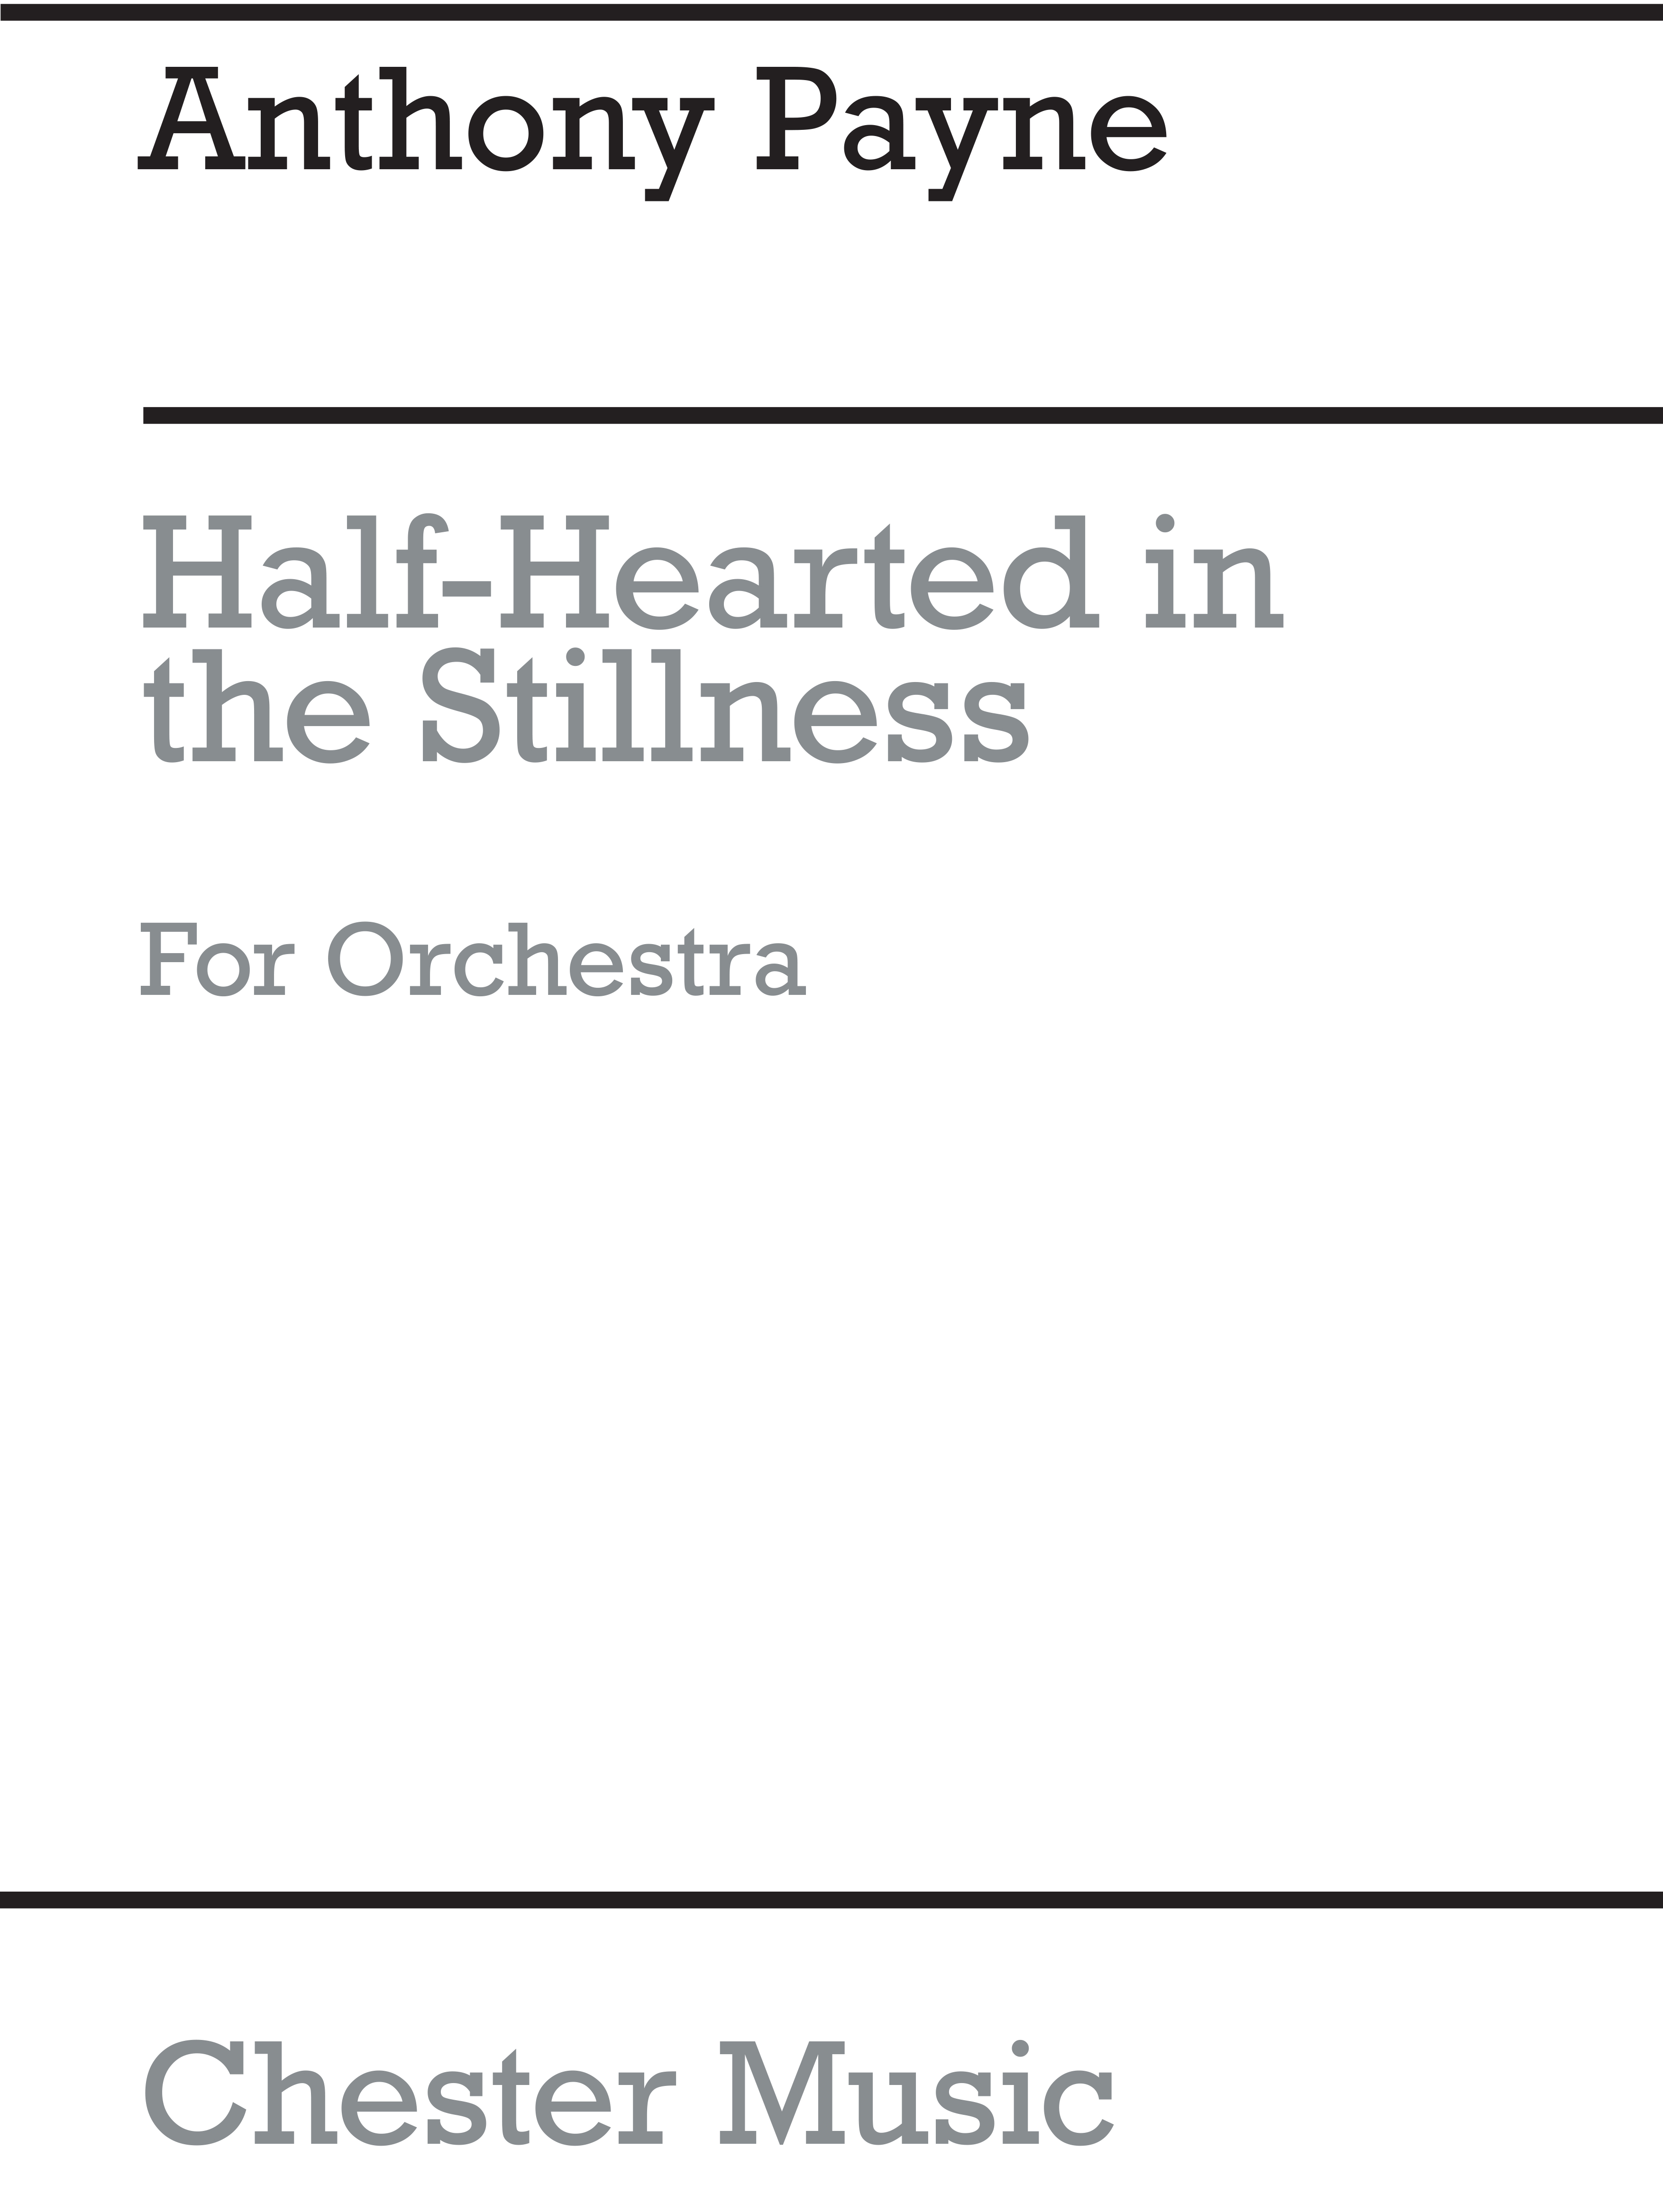 Anthony Payne: Half Heard In The Stillness for Orchestra: Orchestra: Study Score